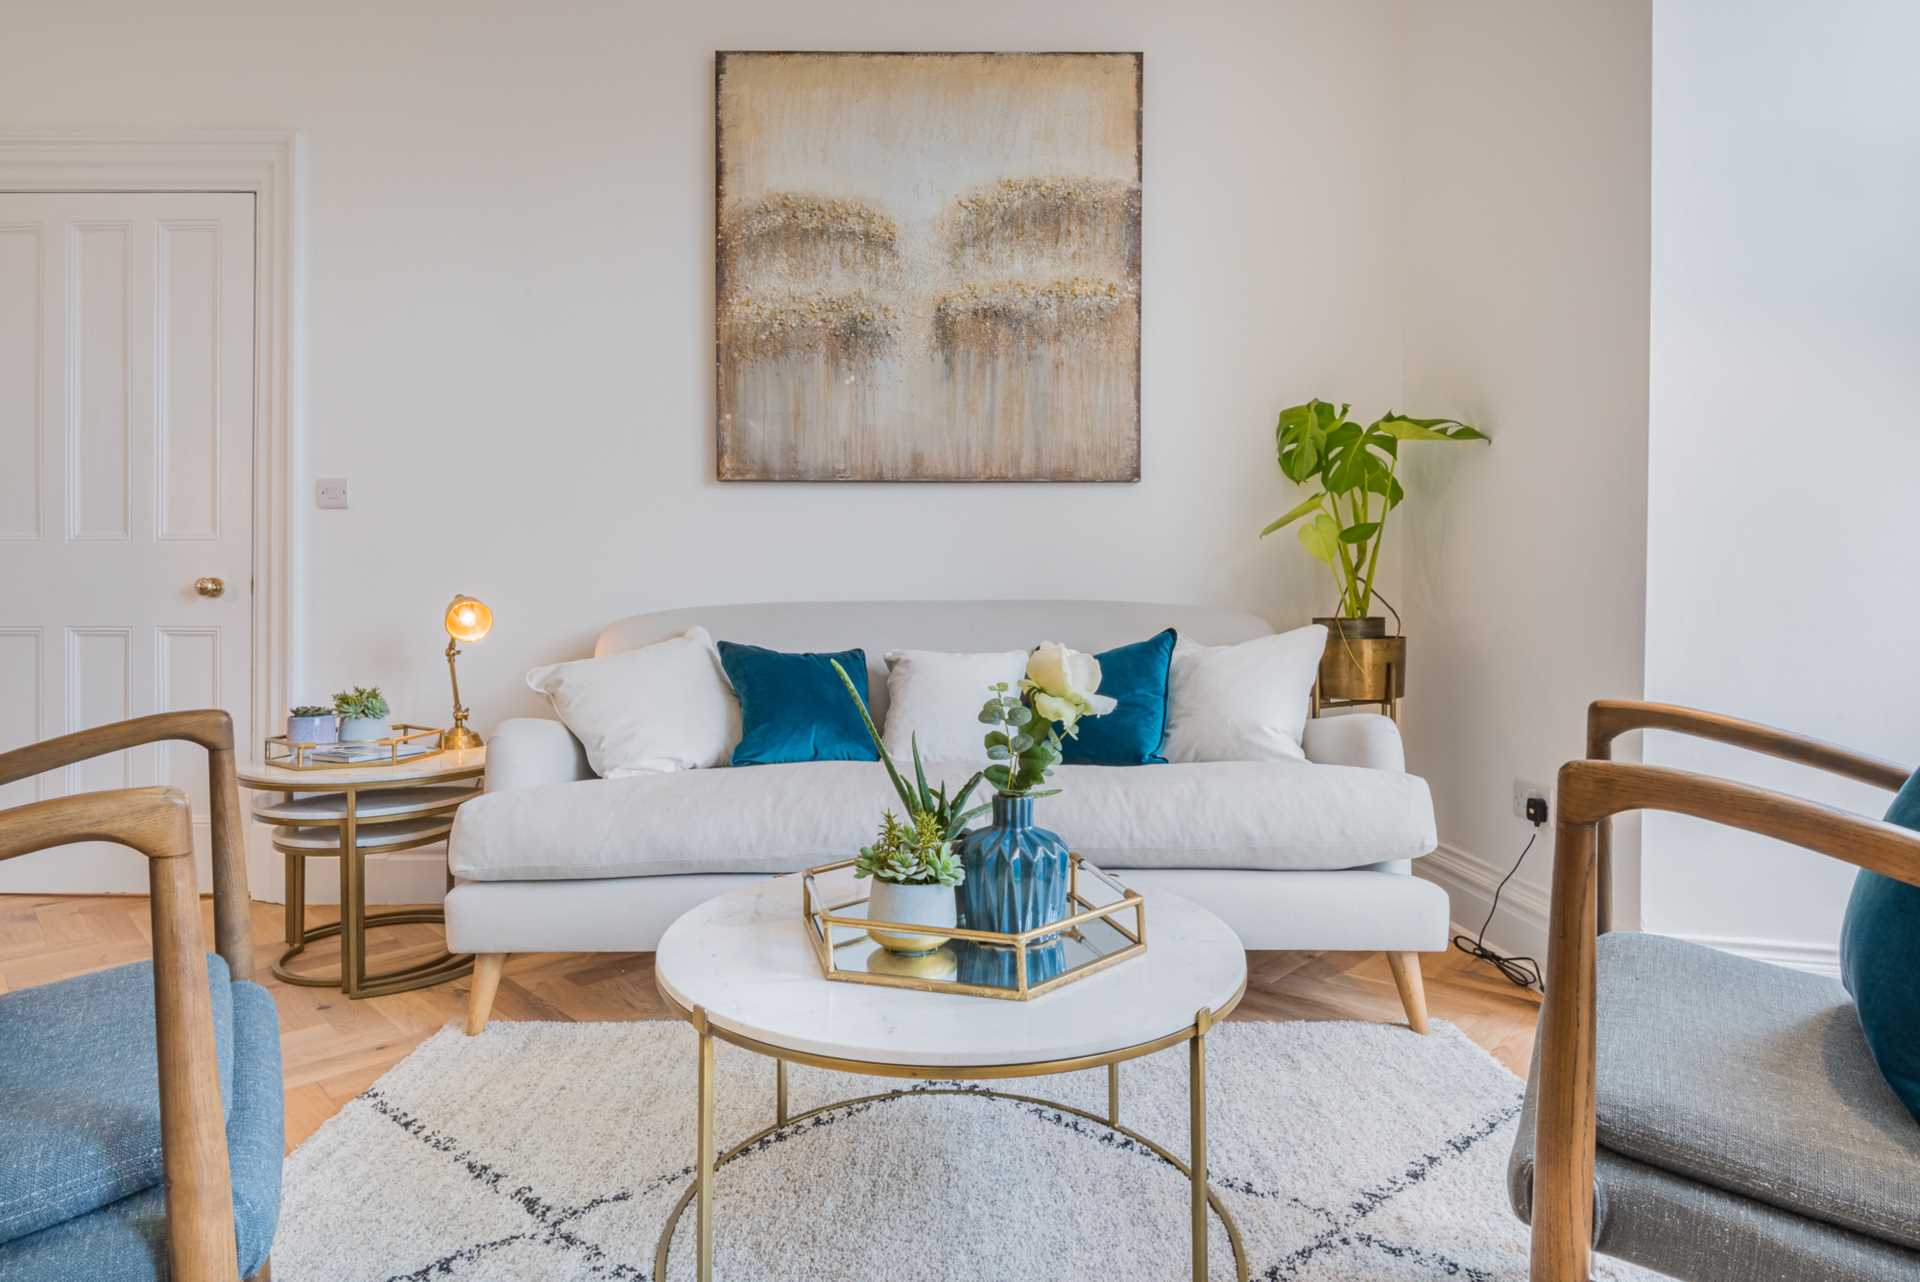 WOW your buyers. 12 styling tips they will love.